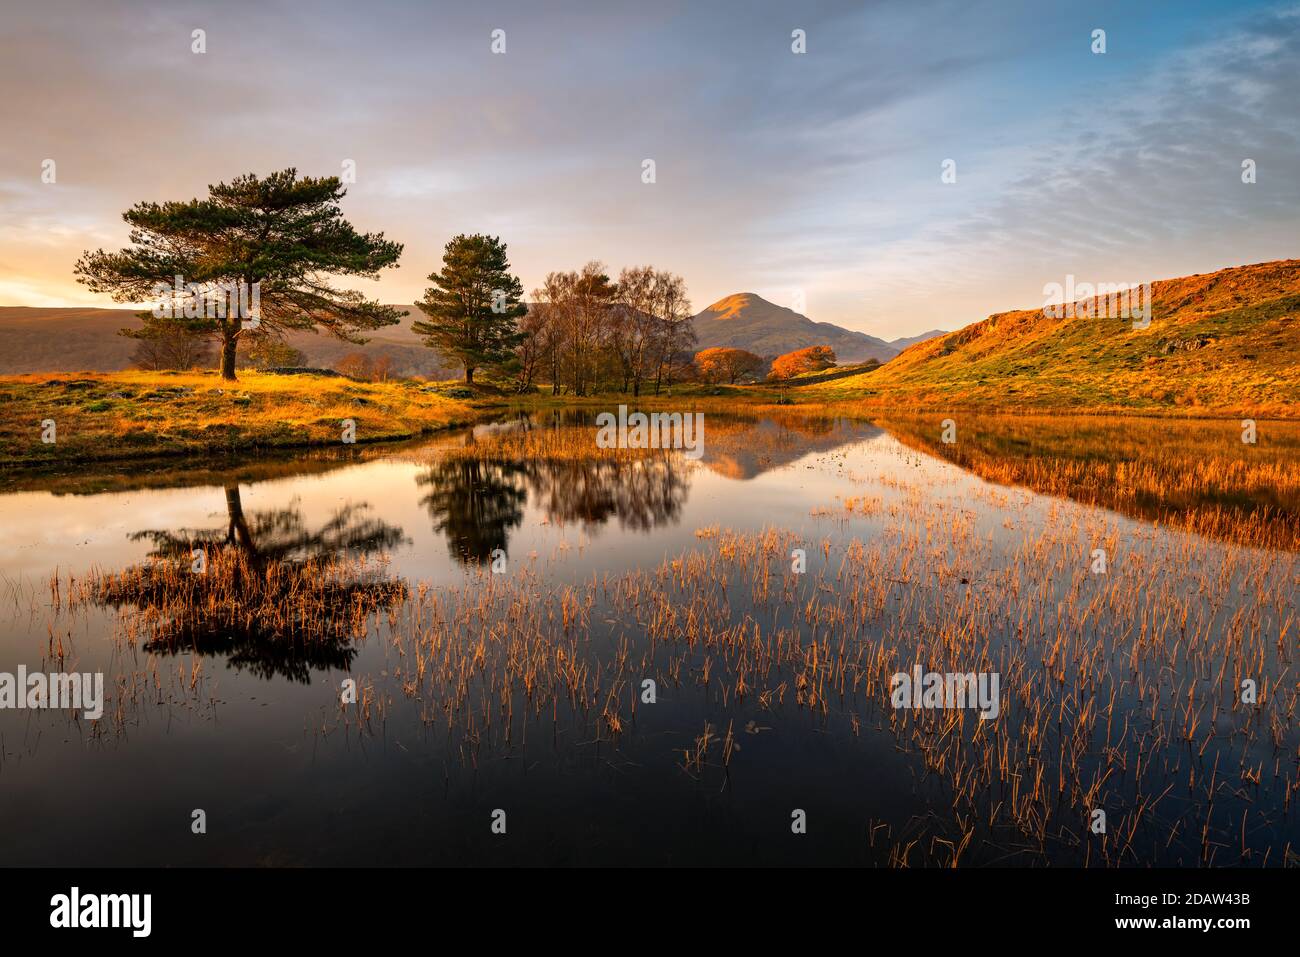 Perfect mirror reflection of trees and mountain in small lake/tarn near Coniston in the Lake District, UK. Stock Photo